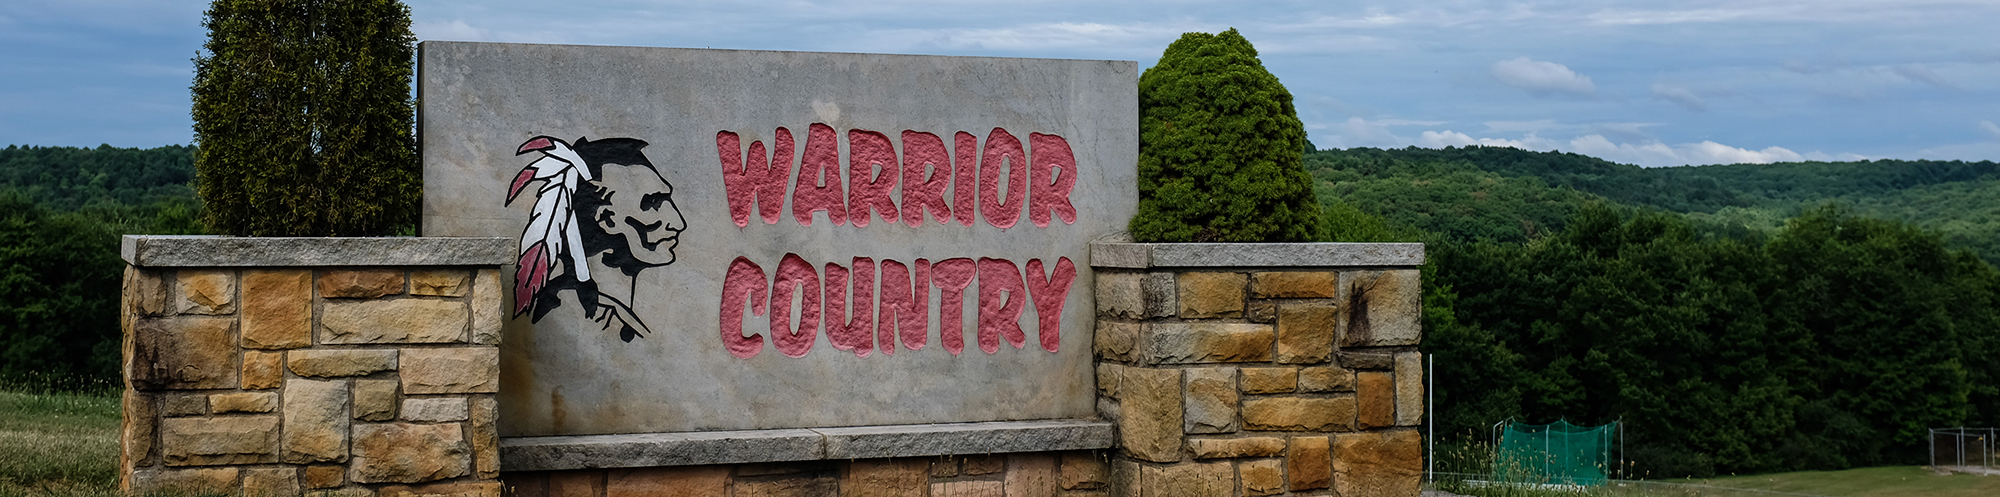 Warrior Country